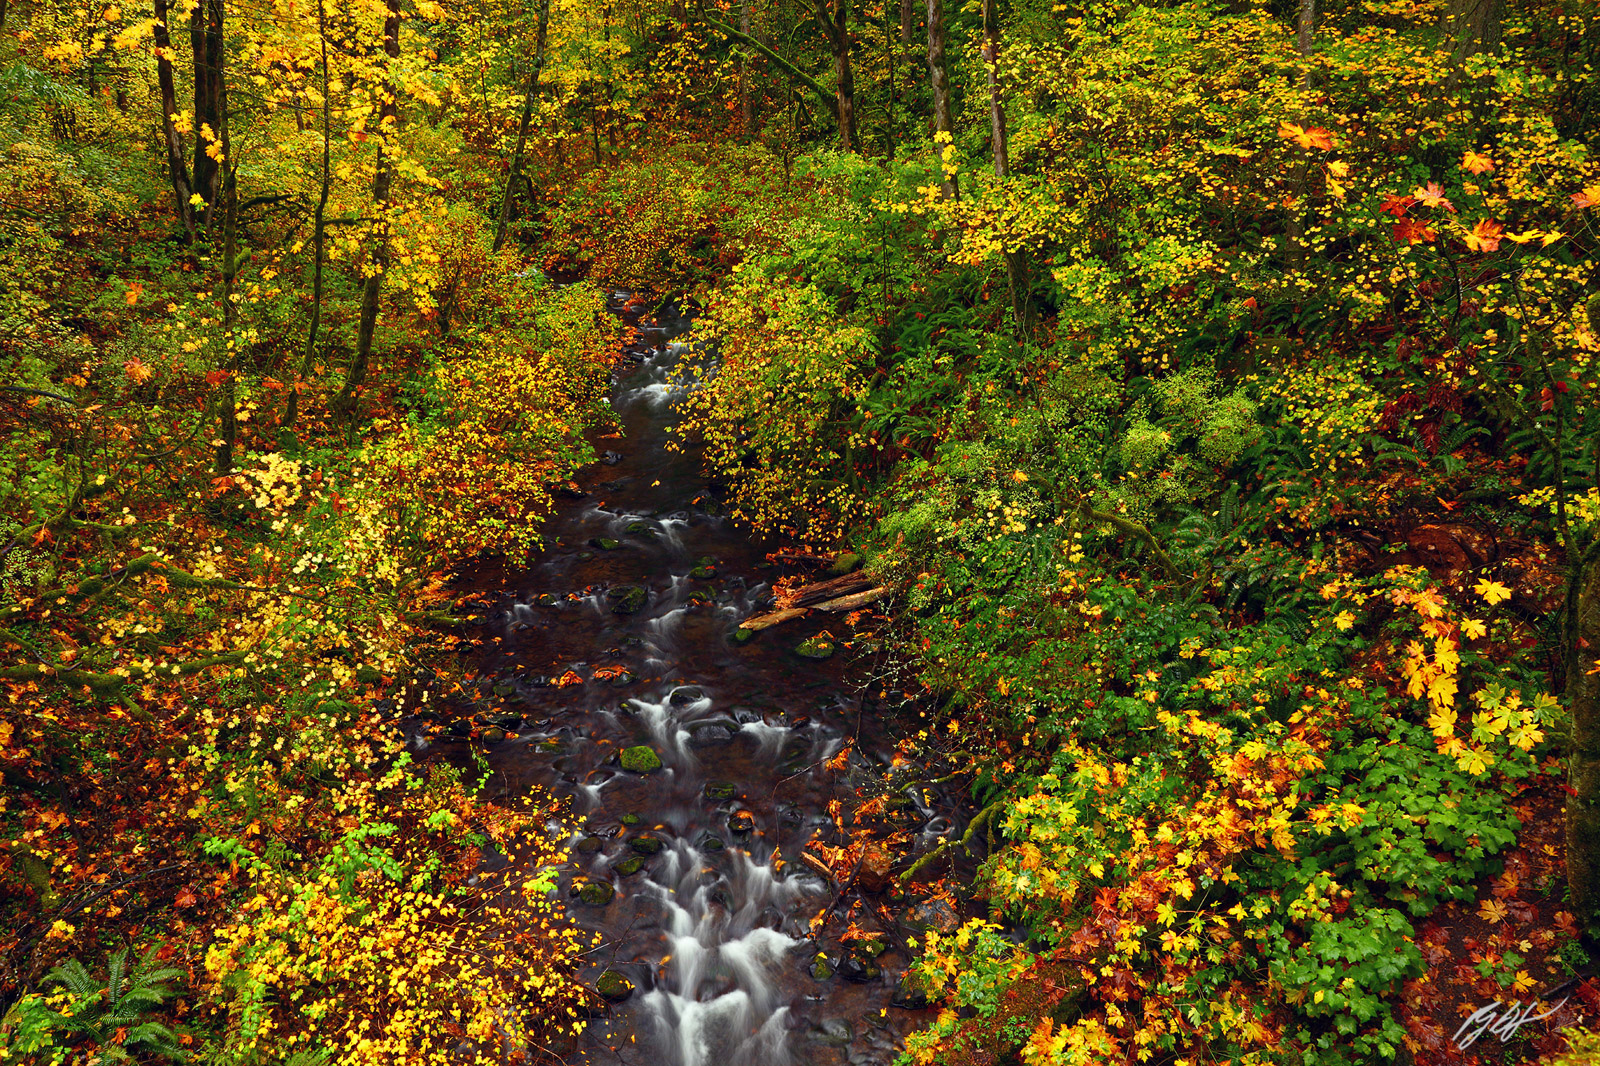 Fall Color and Bridal Veil Creek in the Columbia River Gorge National Scenic Area in Oregon